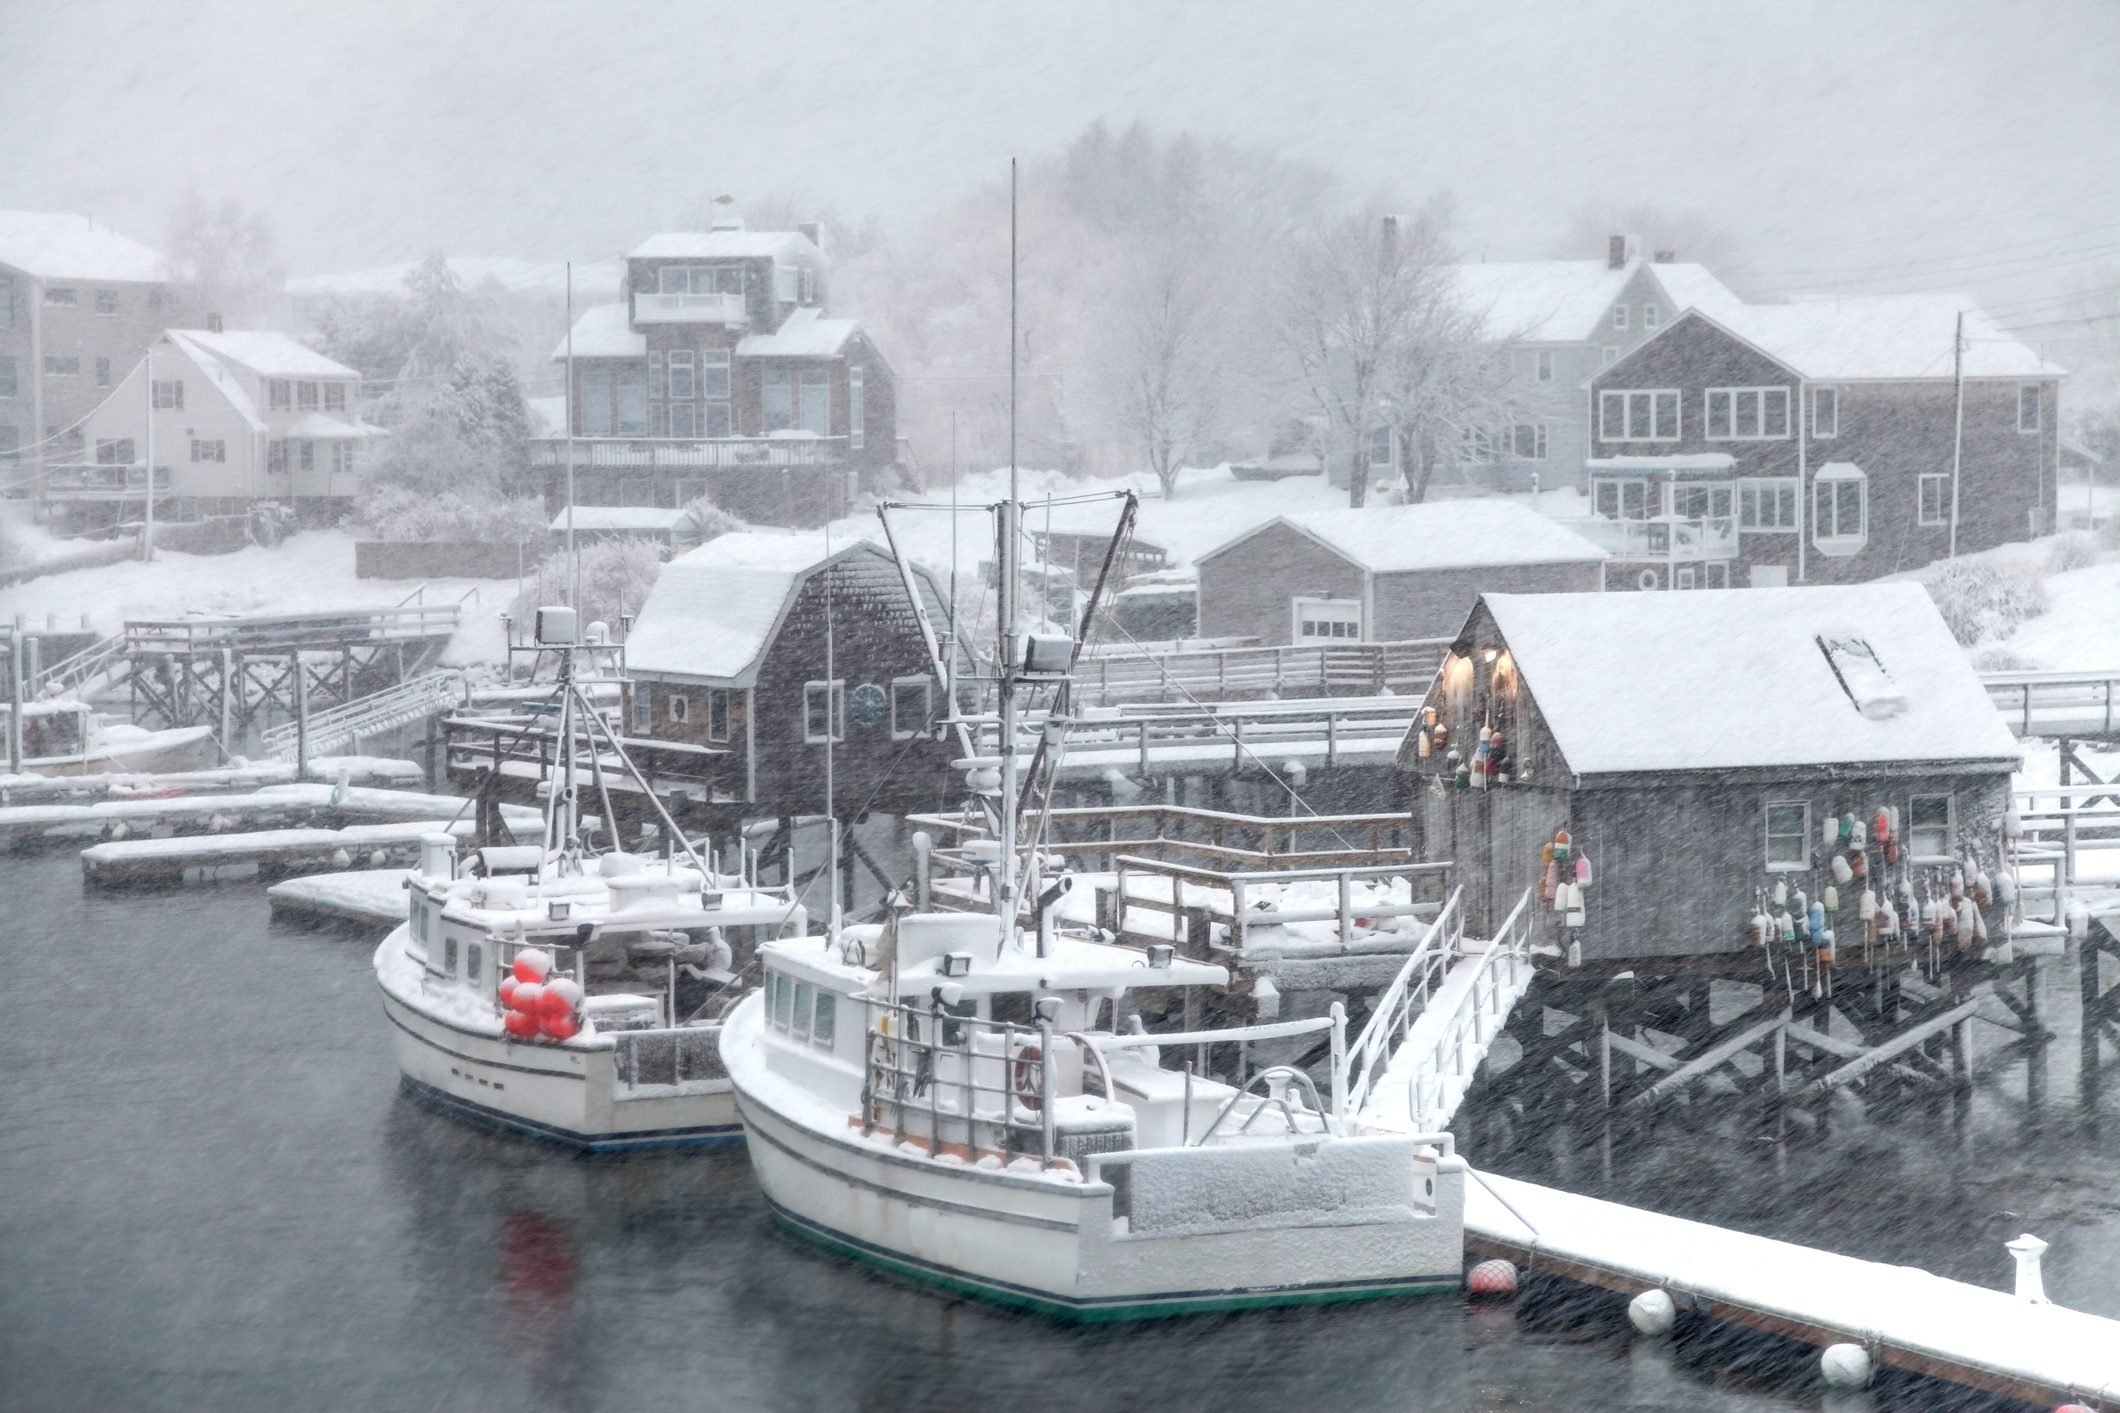 <p><strong>Best for:</strong> New England beach lovers</p> <p>This quiet fishing village gets lively at holiday time with its annual Christmas by the Sea festival. In addition to dressing up the boutiques of downtown, the residents take to the beach to celebrate at Perkins Cove. To experience true Maine style, sample chowder at the Taste the Season event; a bonfire, caroling, hay rides, tree lighting, storytelling, ornament making and craft shows are also part of the fun. The Christmas town has even been known to make Christmas trees out of lobster traps!</p> <p>Ogunquit has many lovely inns, but <a href="https://www.tripadvisor.com/Hotel_Review-g40790-d89263-Reviews-The_Anchorage_By_the_Sea-Ogunquit_Maine.html" rel="noopener">Anchorage by the Sea</a> stands out for its phenomenal oceanfront location, just a short walk into downtown for all the Christmas activities. Ask for a room with a view to take full advantage of the setting.</p> <p class="listicle-page__cta-button-shop"><a class="shop-btn" href="https://www.tripadvisor.com/Hotel_Review-g40790-d89263-Reviews-The_Anchorage_By_the_Sea-Ogunquit_Maine.html">Book Now</a></p>